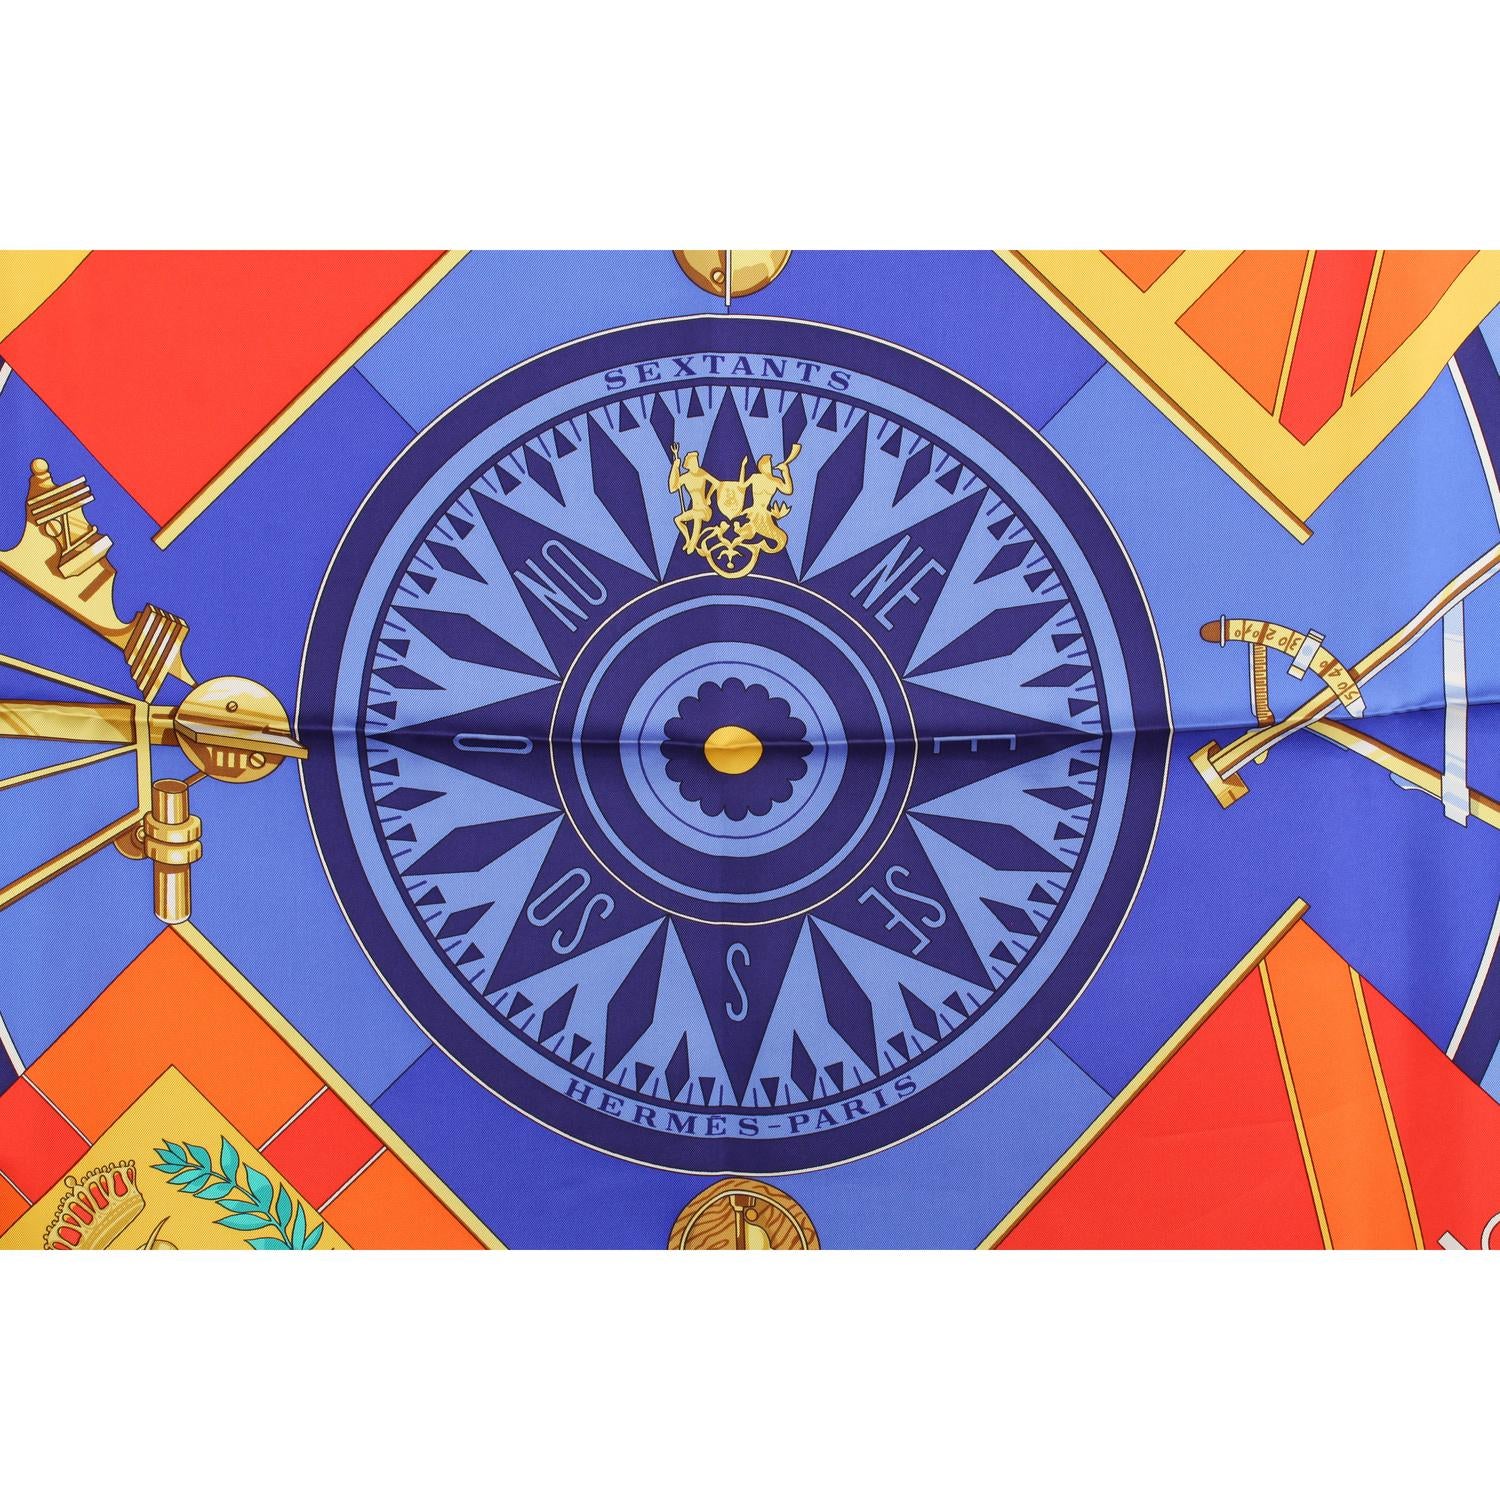 HERMES scarf 'SEXTANTS' by Loic Dubigeon and originally issued in 1981.

Color: Blue
Material: Silk
Model: Scarf
Gender: Women
Country of Manufacture: France
Size: 35 x 35 inches - 88,8 x 88, 8 cm 